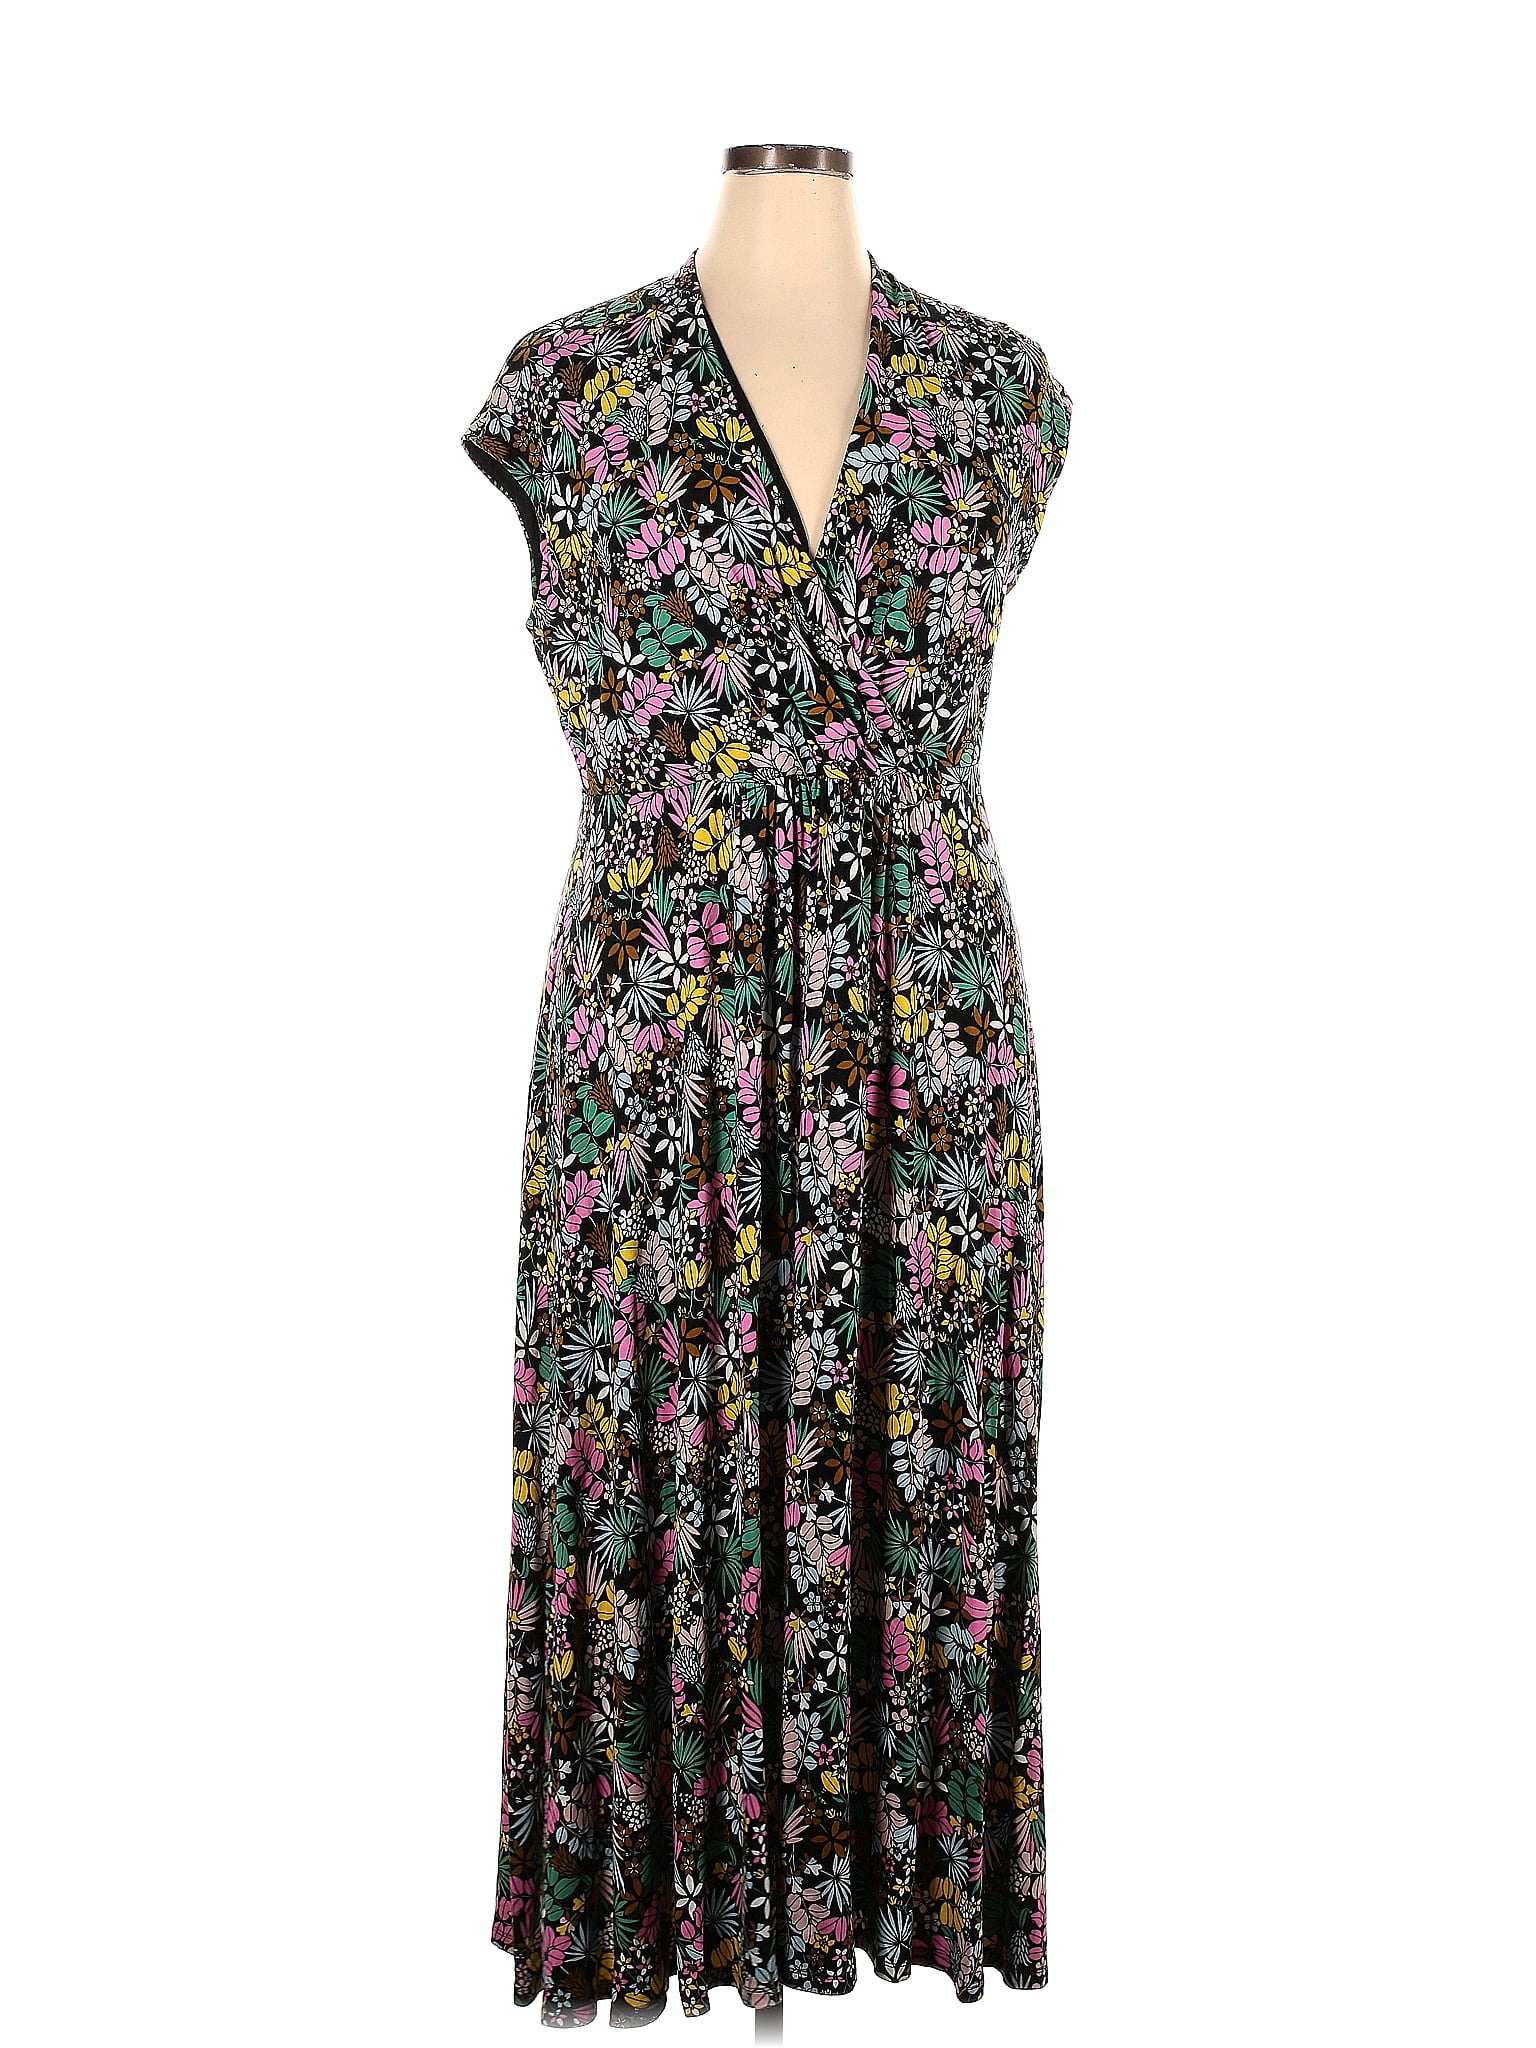 Boden 100% Polyester Floral Multi Color Black Casual Dress Size 14 - 56 ...